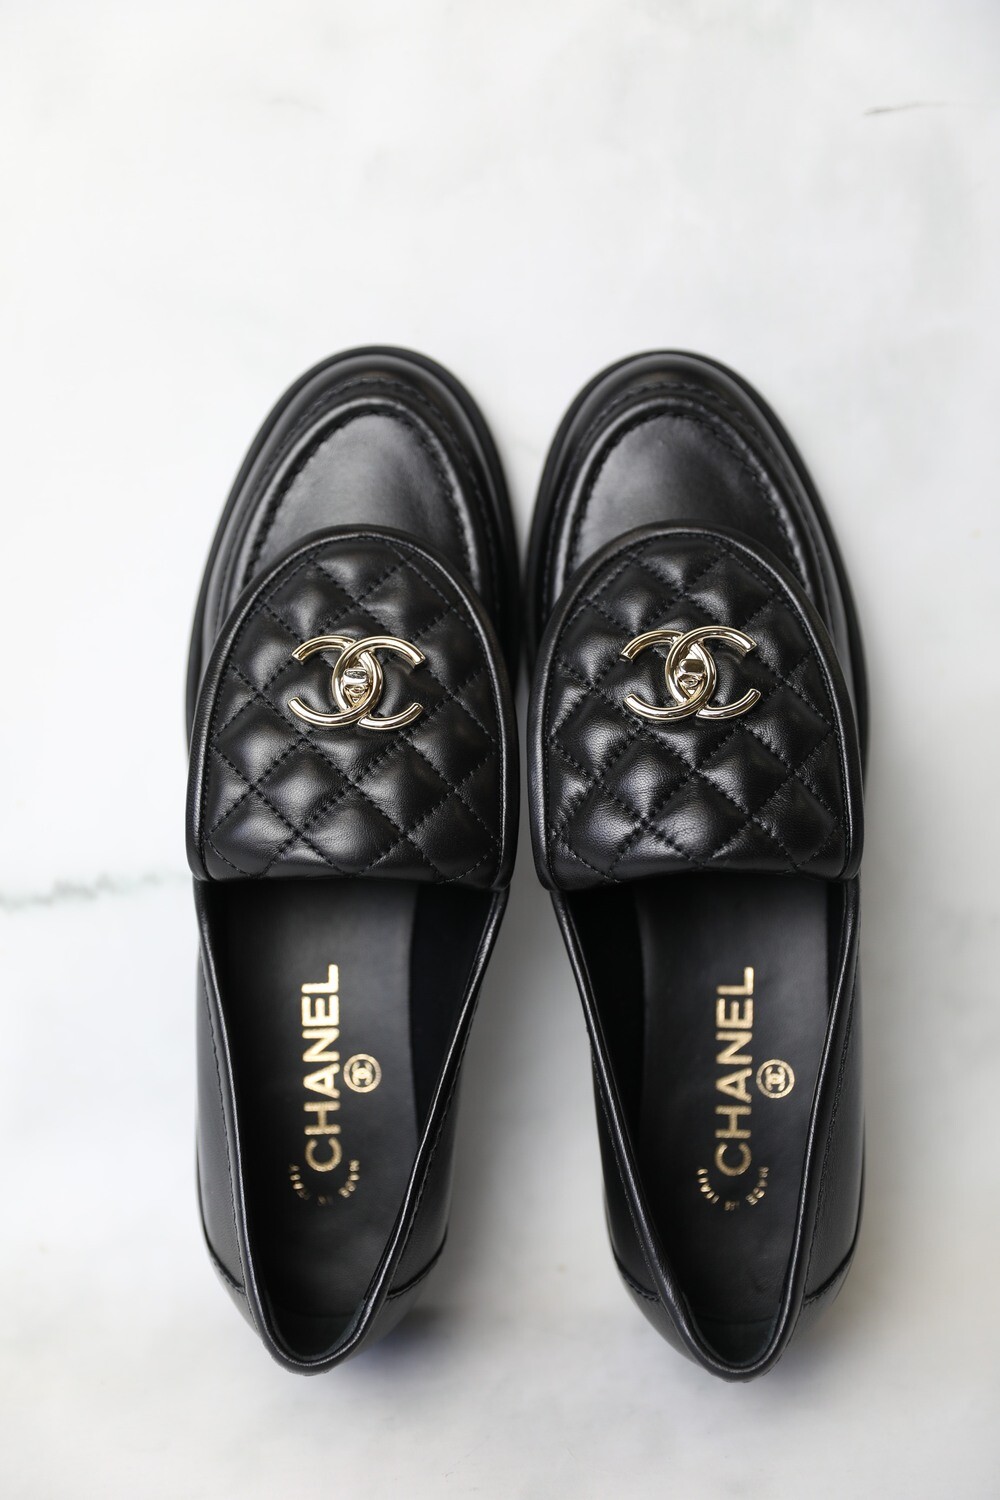 Chanel Turnlock Loafer, Black with Gold Hardware, Size 39.5, New in Box  MA001